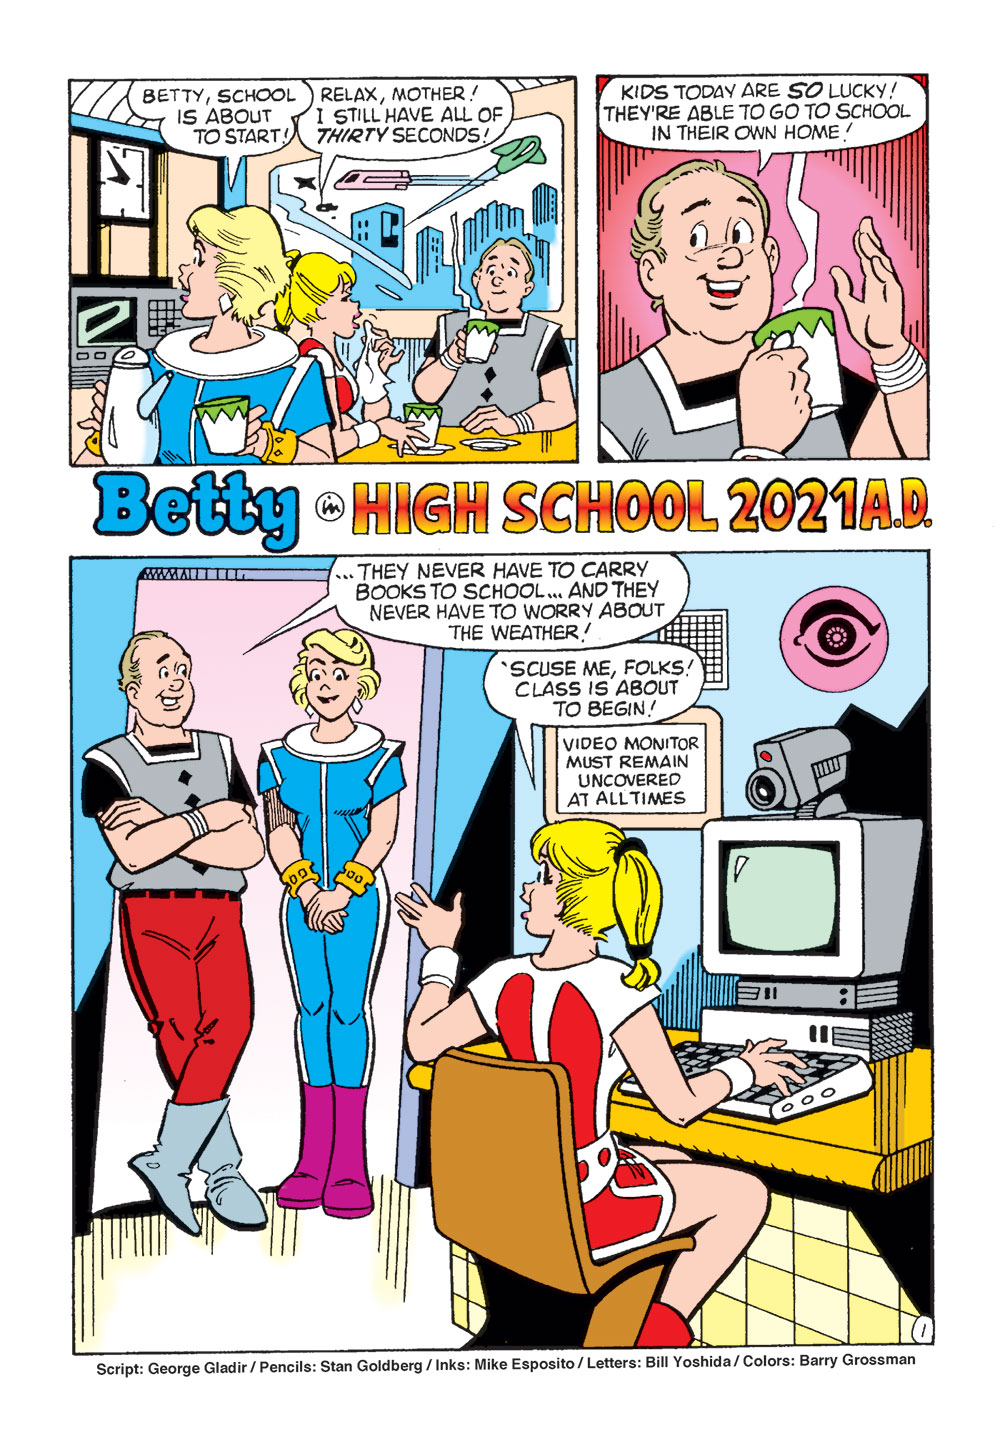 image: In a 1997 Archie Comics, one story featuring Betty Cooper, titled "High School 2021 A.D" predicts the state of learning in 2021. From the breakfast table, Betty's mother calls to her daughter: "Betty, School is about to start!" "Relax, Mother! I still have thirty seconds!" In the next panel, Betty's father drinks his steaming liquid and retorts, "Kids today are SO lucky! They're able to go to school in their own home!" In the third and final frame, Betty's Dad continues, "They never have to carry books to school...and they never have to worry about the weather!" "'Scue me, folks!" says Betty. "Class is about to begin!" She sits in front of a computer, perhaps a model typical in the mid-1990s. A very large camera sits atop the monitor. A sign on the wall reads "video monitor must remain uncovered at all times." Visible on the wall behind Betty's desk, a giant pink eye suggests the state of Betty's learning ecology; her bedroom is now a site of state surveillance. The 6-page story, originally titled Betty in High School 2021 A.D. was written by George Gladir, with art by Stan Goldberg, Mike Esposito, Bill Yoshida, and Barry Grossman. In this story we find Betty and her friends in Riverdale dealing with the struggles of virtual home schooling.